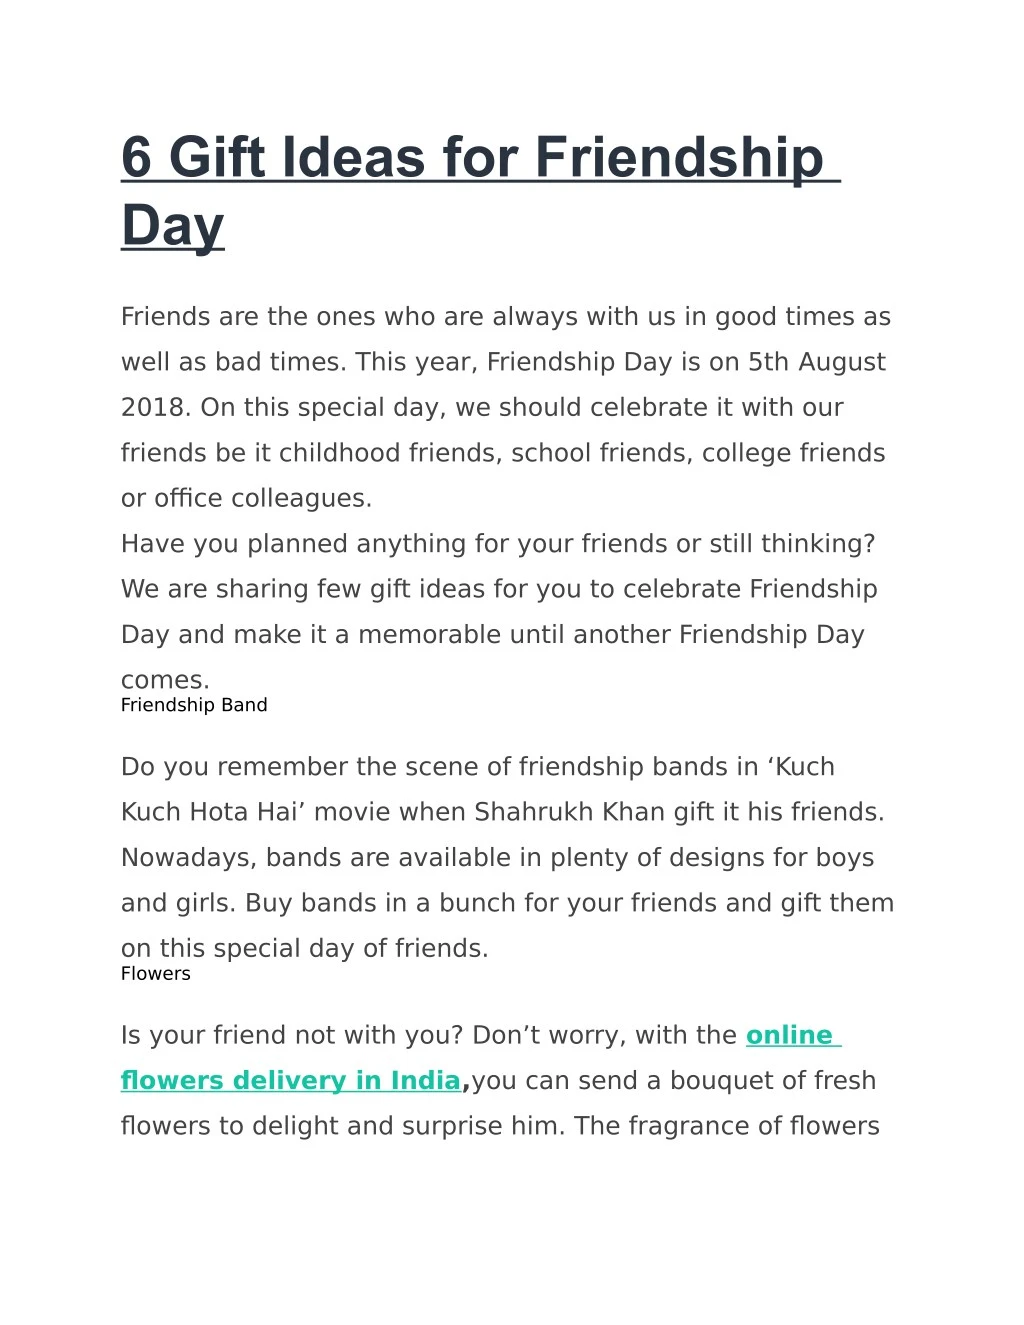 6 gift ideas for friendship day